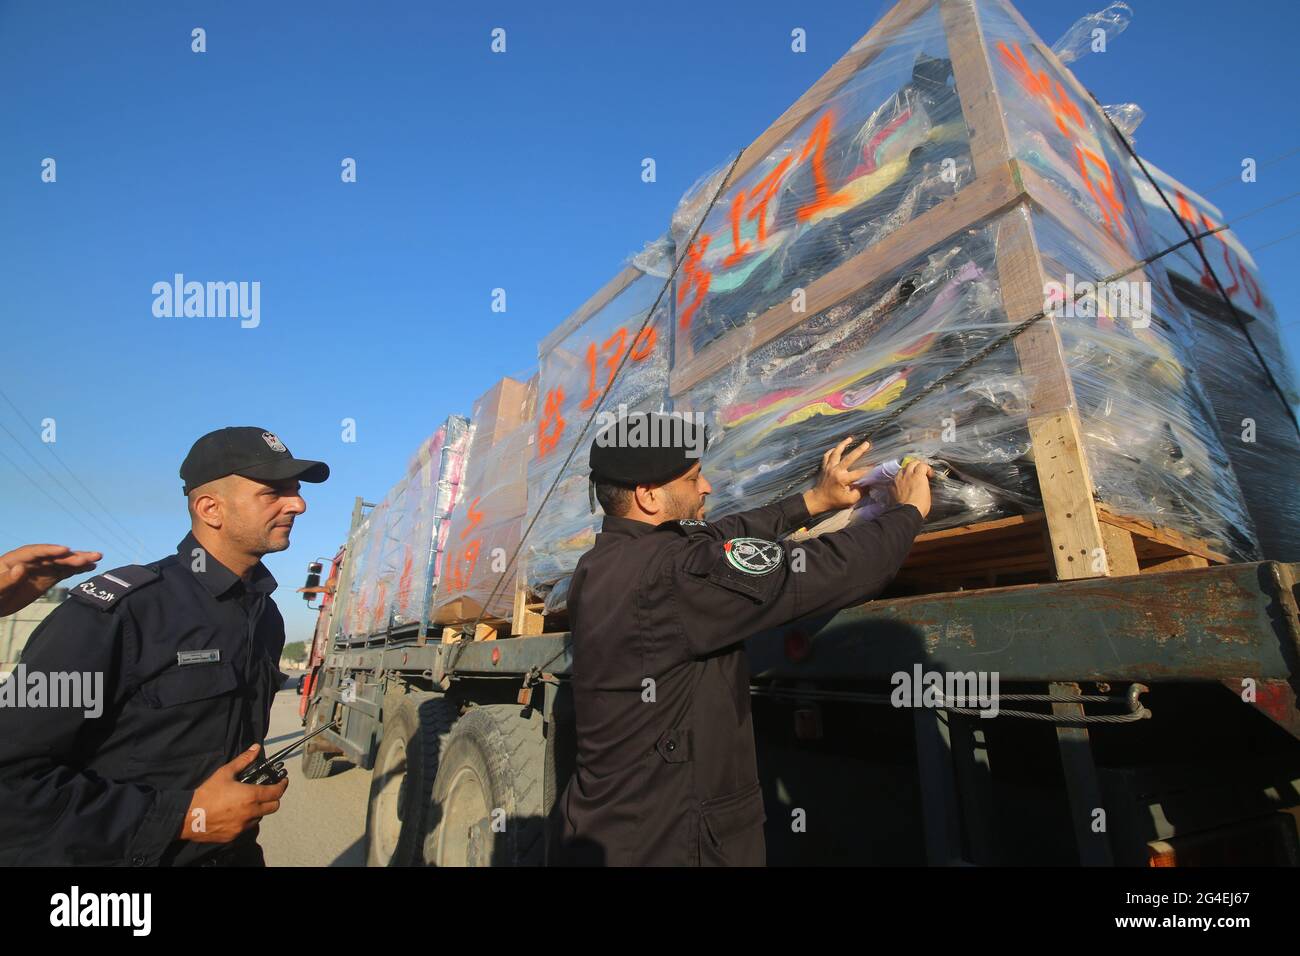 (210621) -- RAFAH, June 21, 2021 (Xinhua) -- A Palestinian police officer inspects clothes for export on a truck at the Kerem Shalom Crossing in the southern Gaza Strip city of Rafah, on June 21, 2021. Israel on Monday eased some restrictions imposed on the Gaza Strip crossings. (Photo by Khaled Omar/Xinhua) Stock Photo